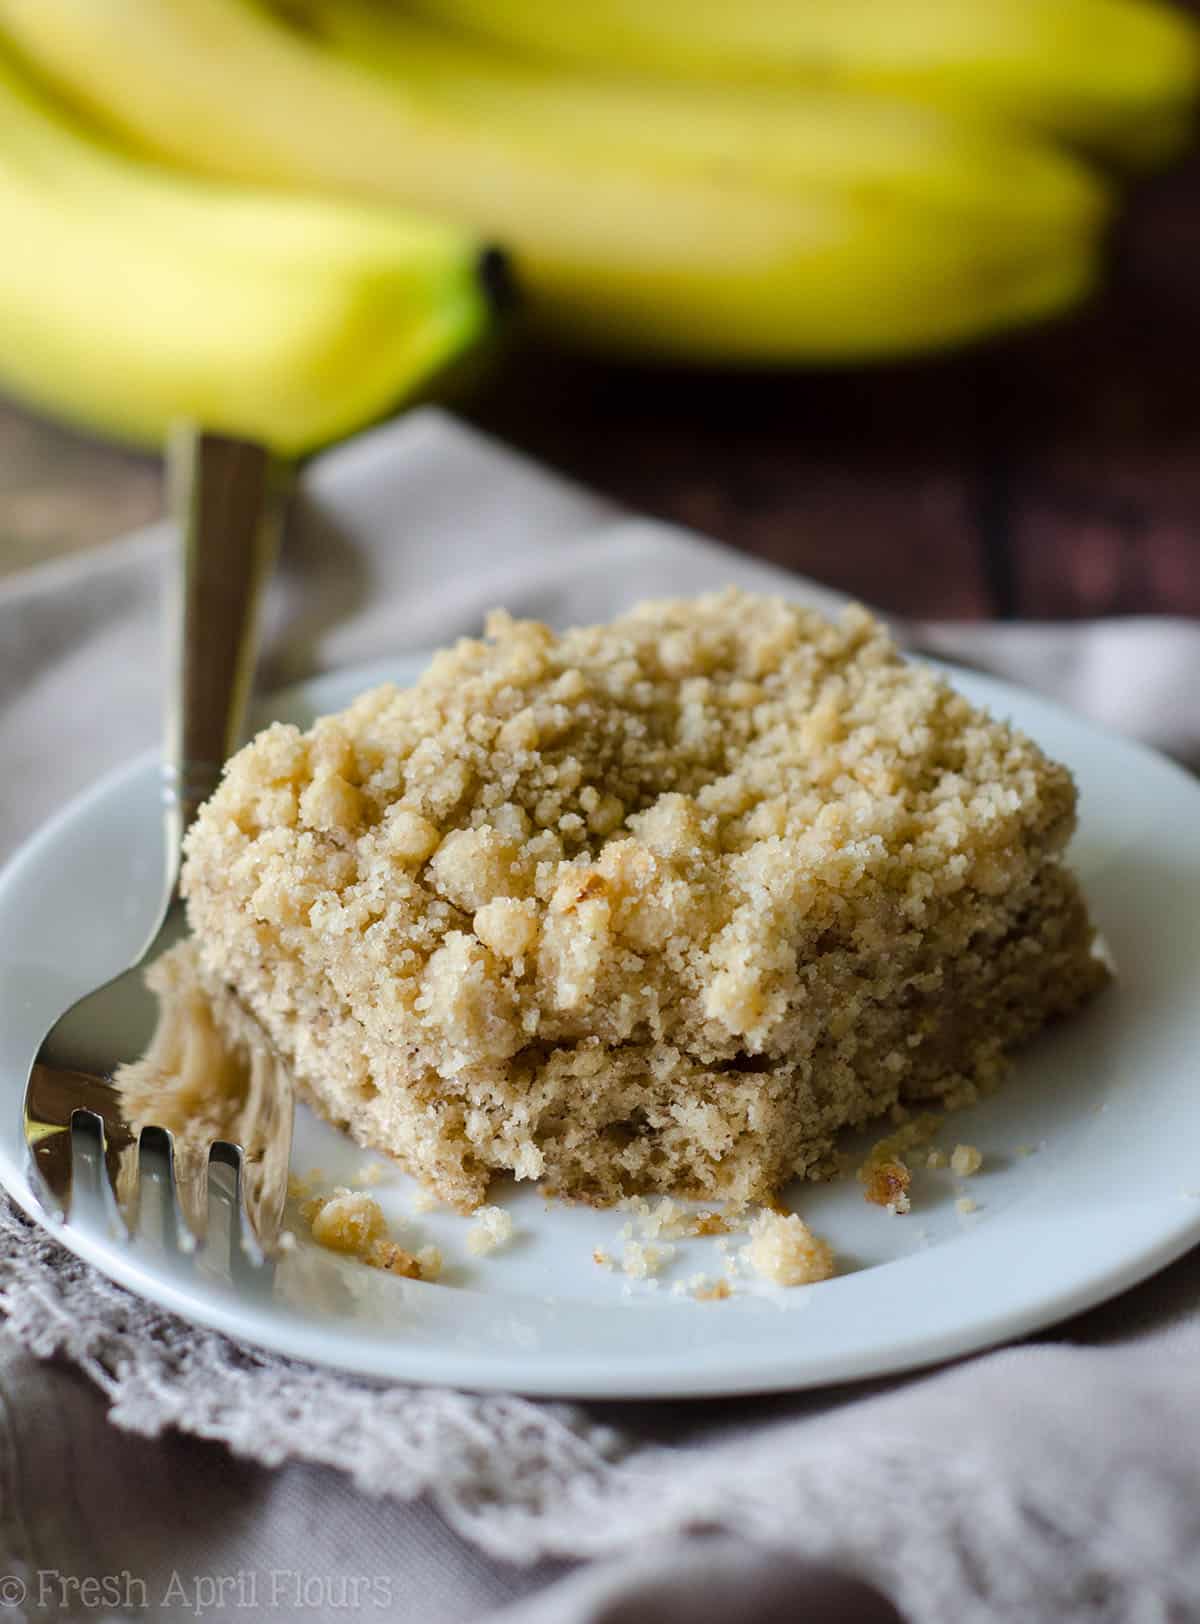 Banana Crumb Snack Cake: A simple and perfectly moist banana cake with a fine sandy crumb topping.